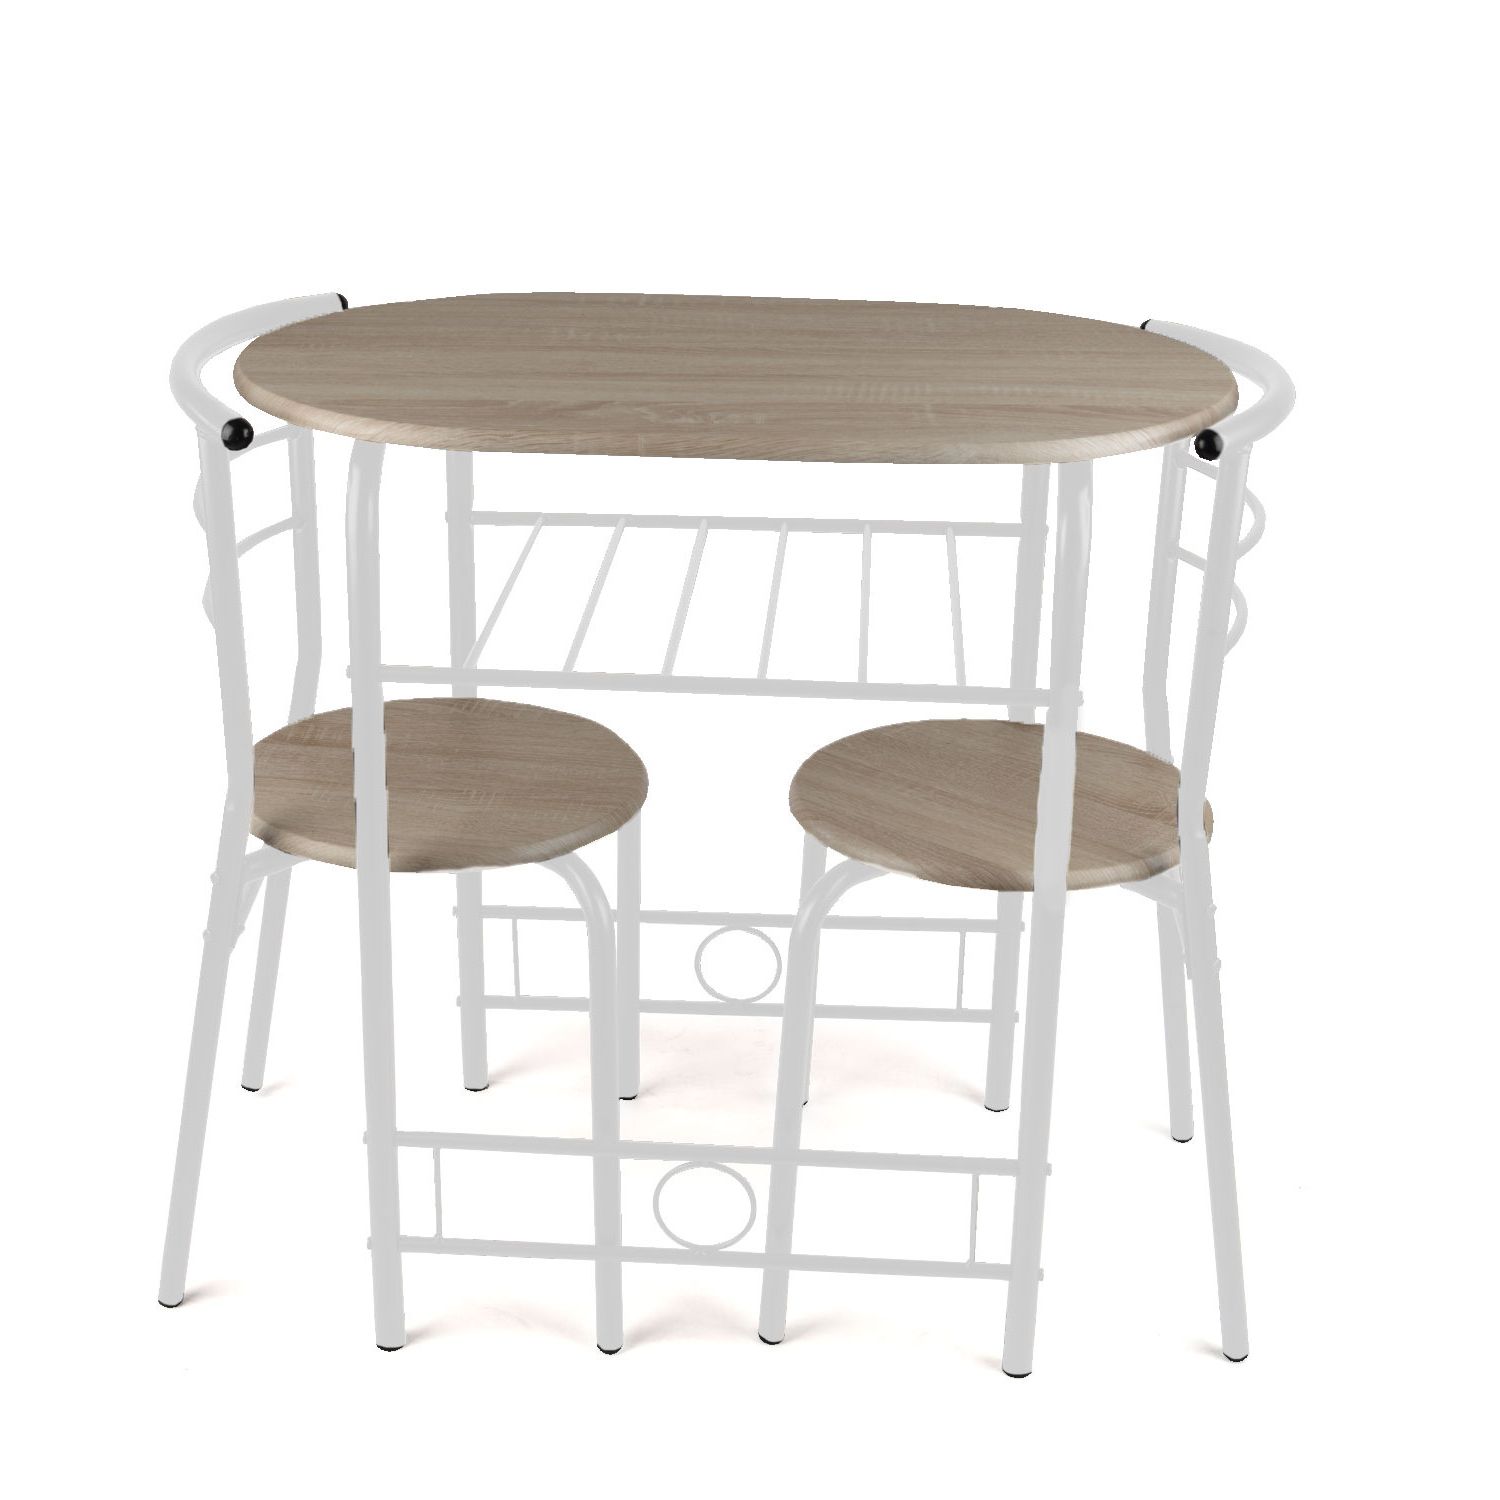 Roto2 Intended For 3 Piece Breakfast Dining Sets (View 11 of 20)